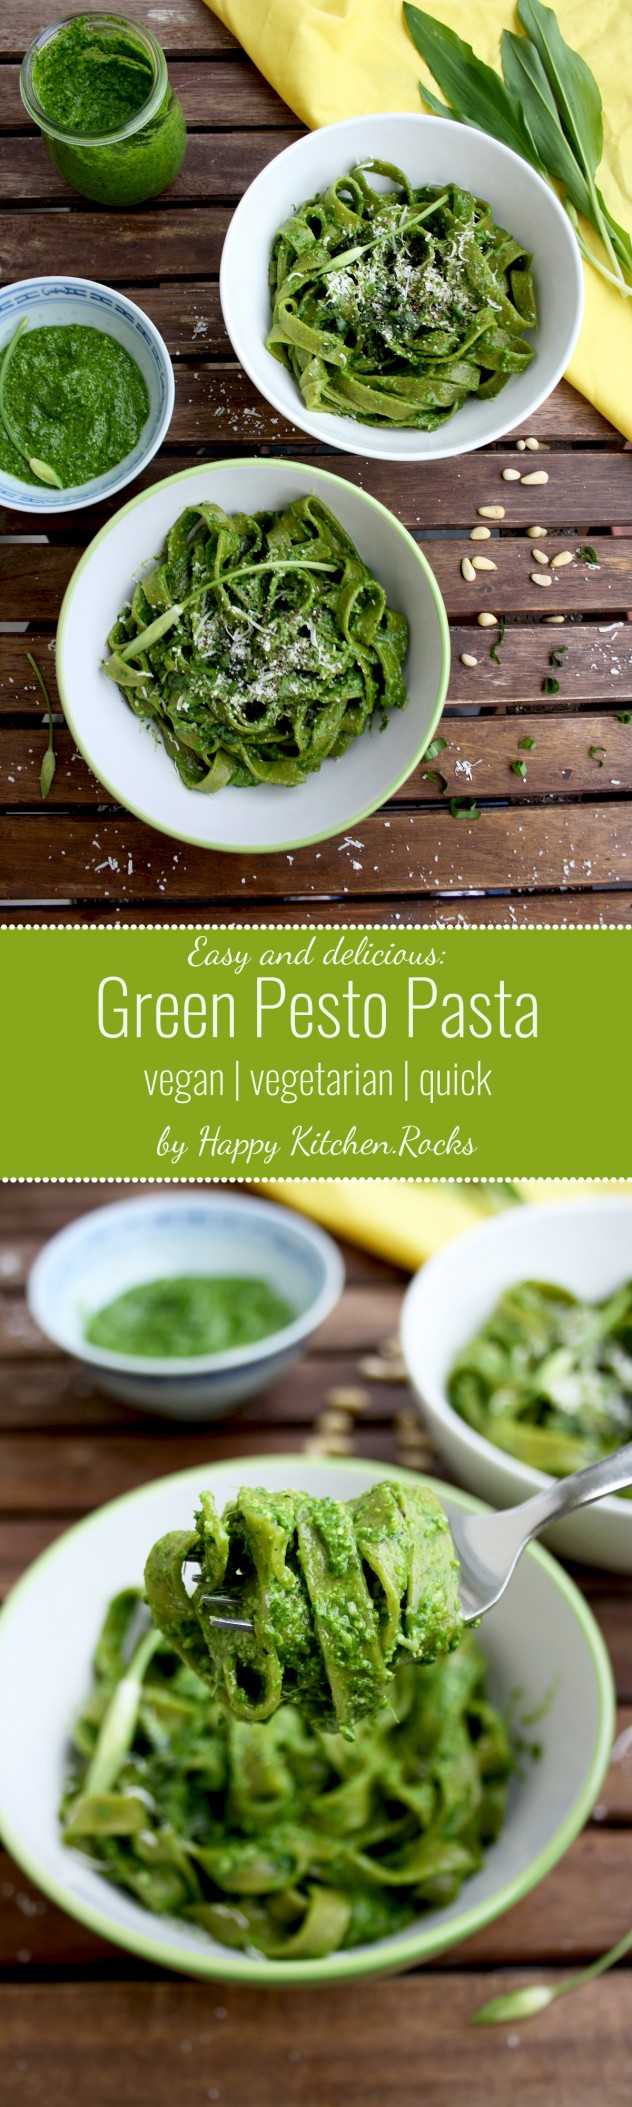 Easy Green Pesto Pasta with Wild Garlic: Quick and healthy vegetarian (or vegan) dinner full of spring flavors ready in just 10 minutes with 4 ingredients!